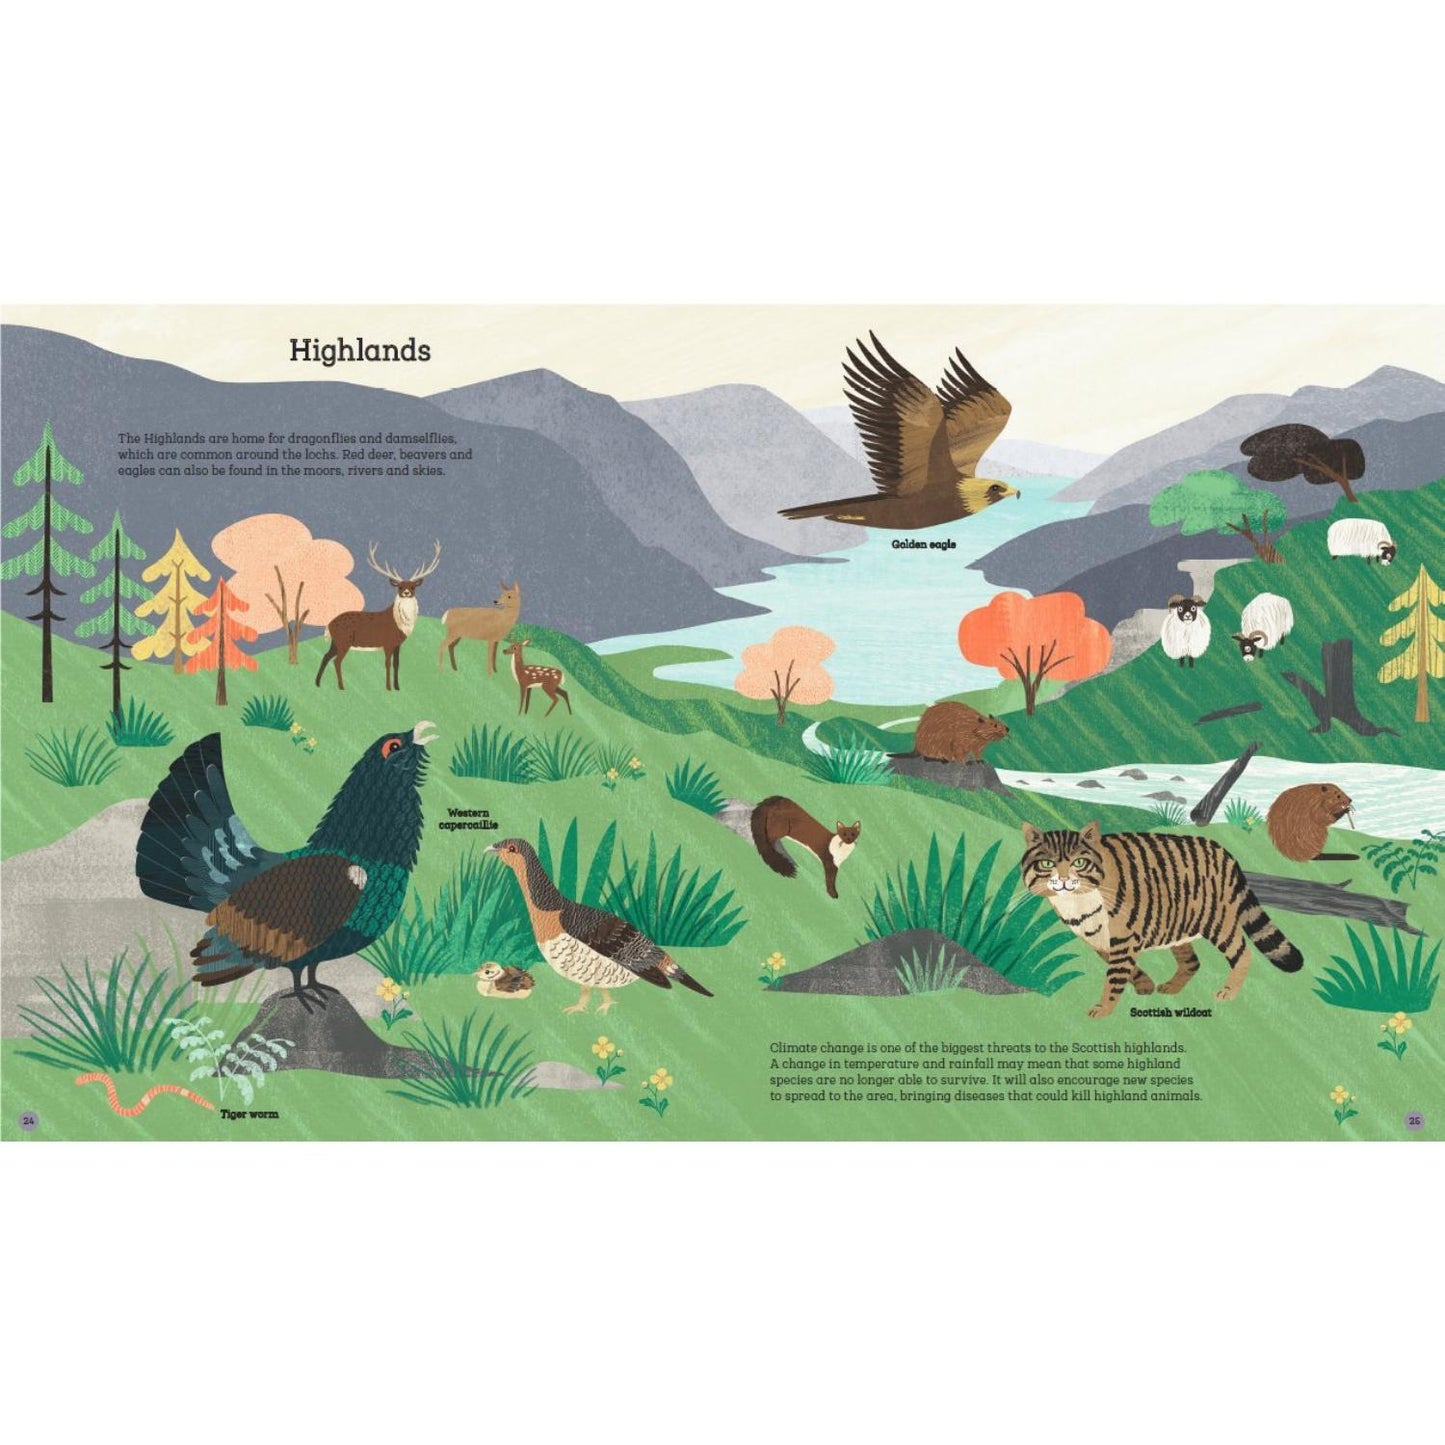 How to Help a Hedgehog and Protect a Polar Bear | Children's Books on Activism